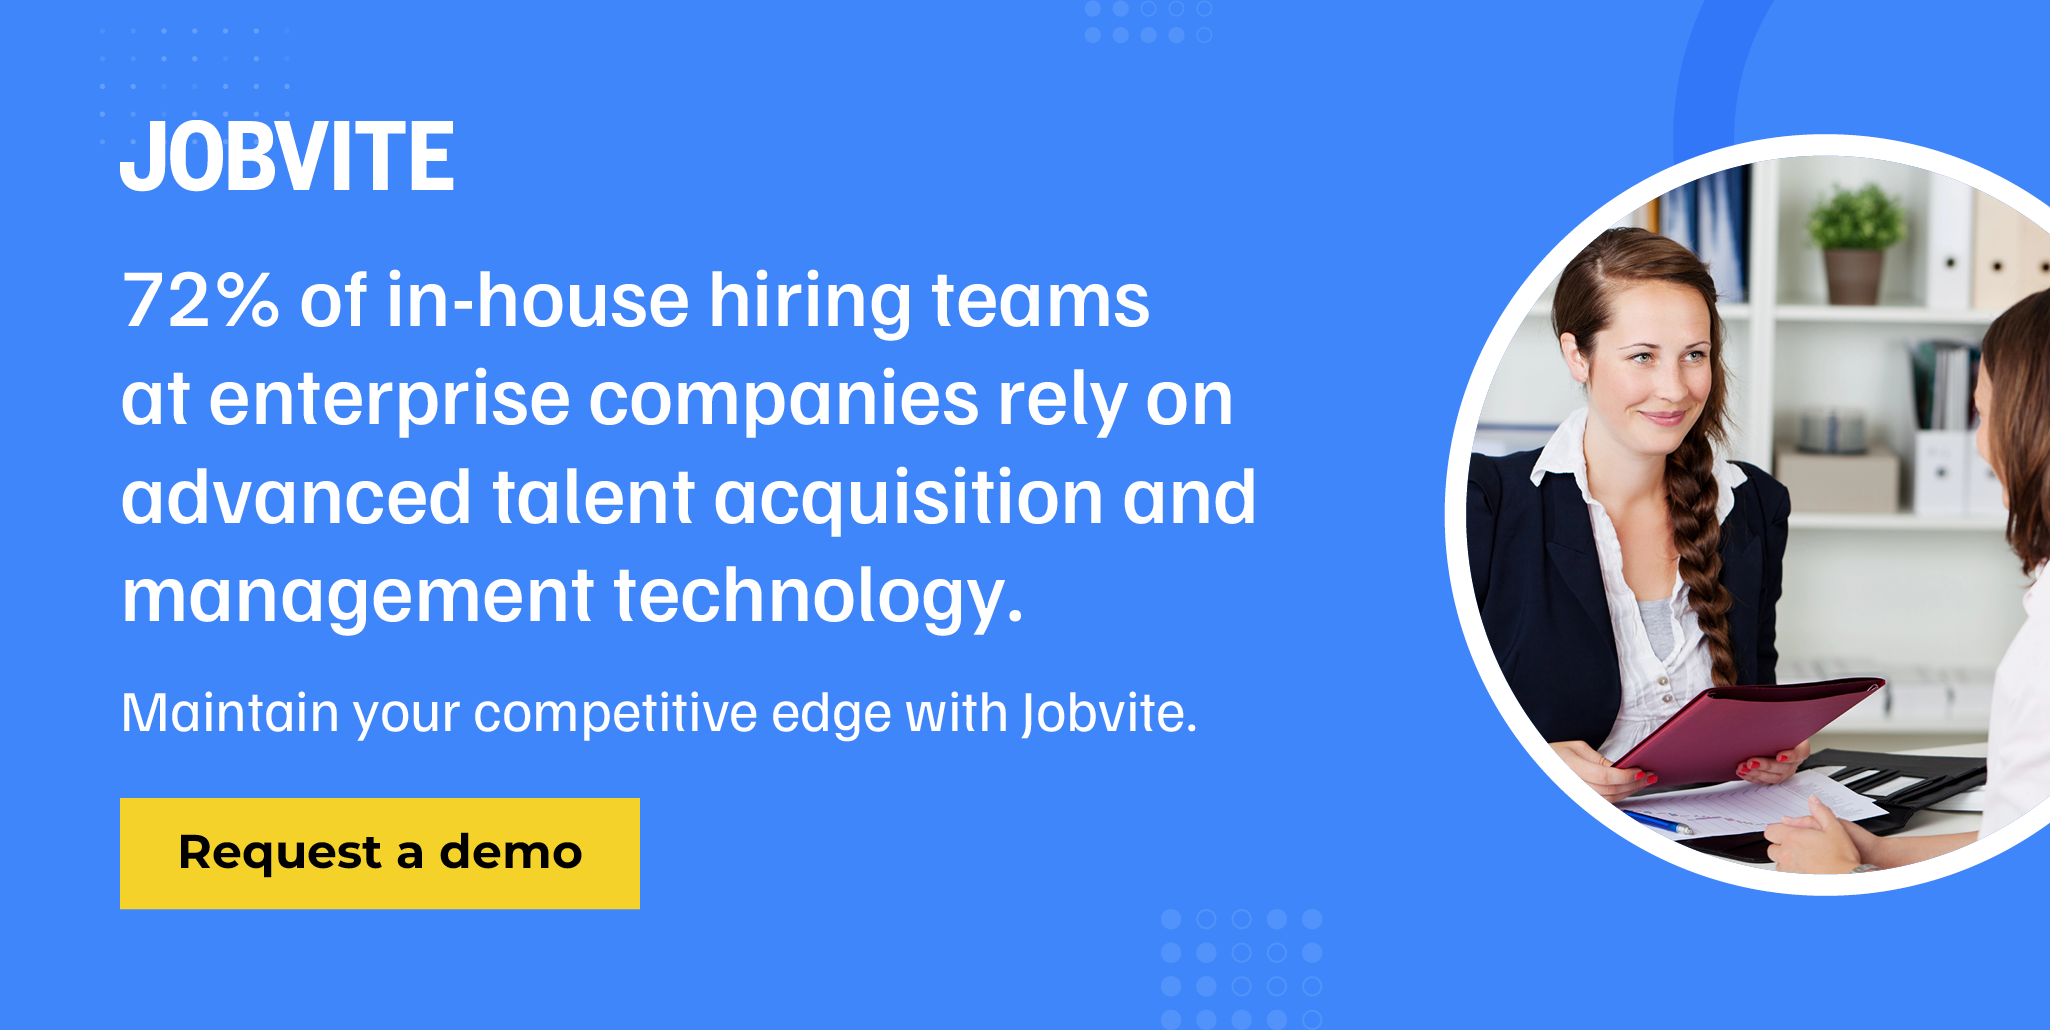 Click here to experience why Jobvite is the best option to power your talent acquisition strategies.